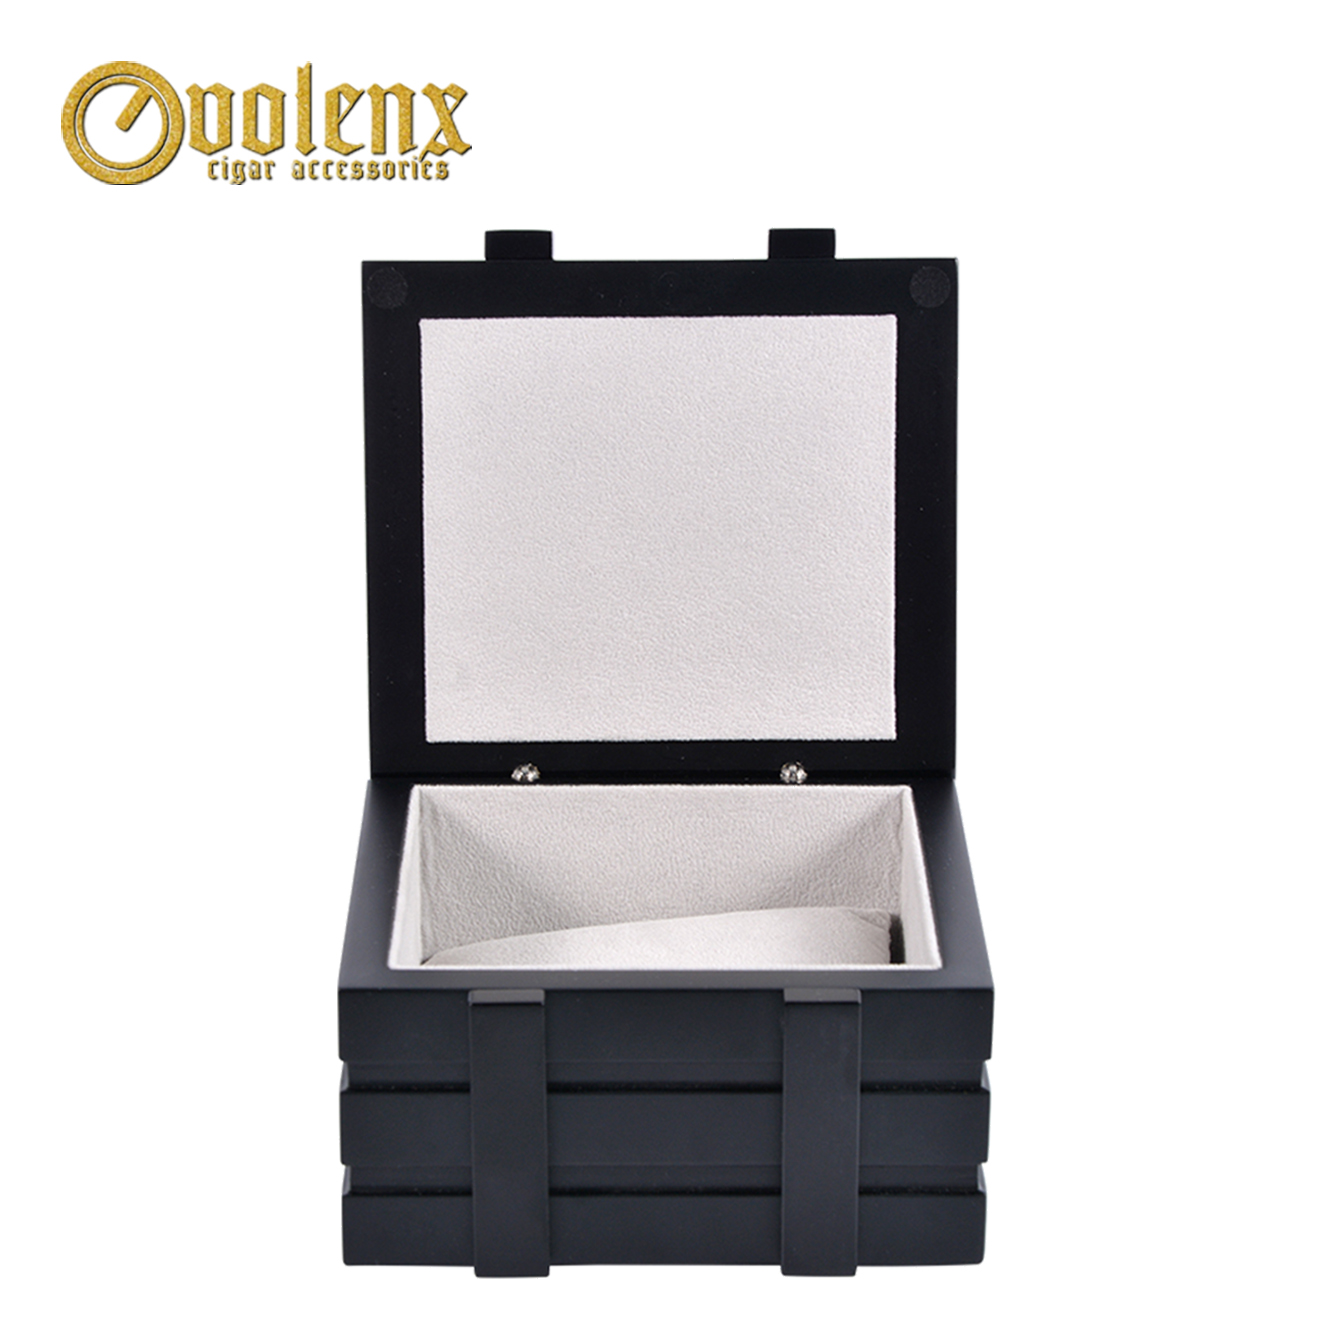  High Quality wooden watch box 5